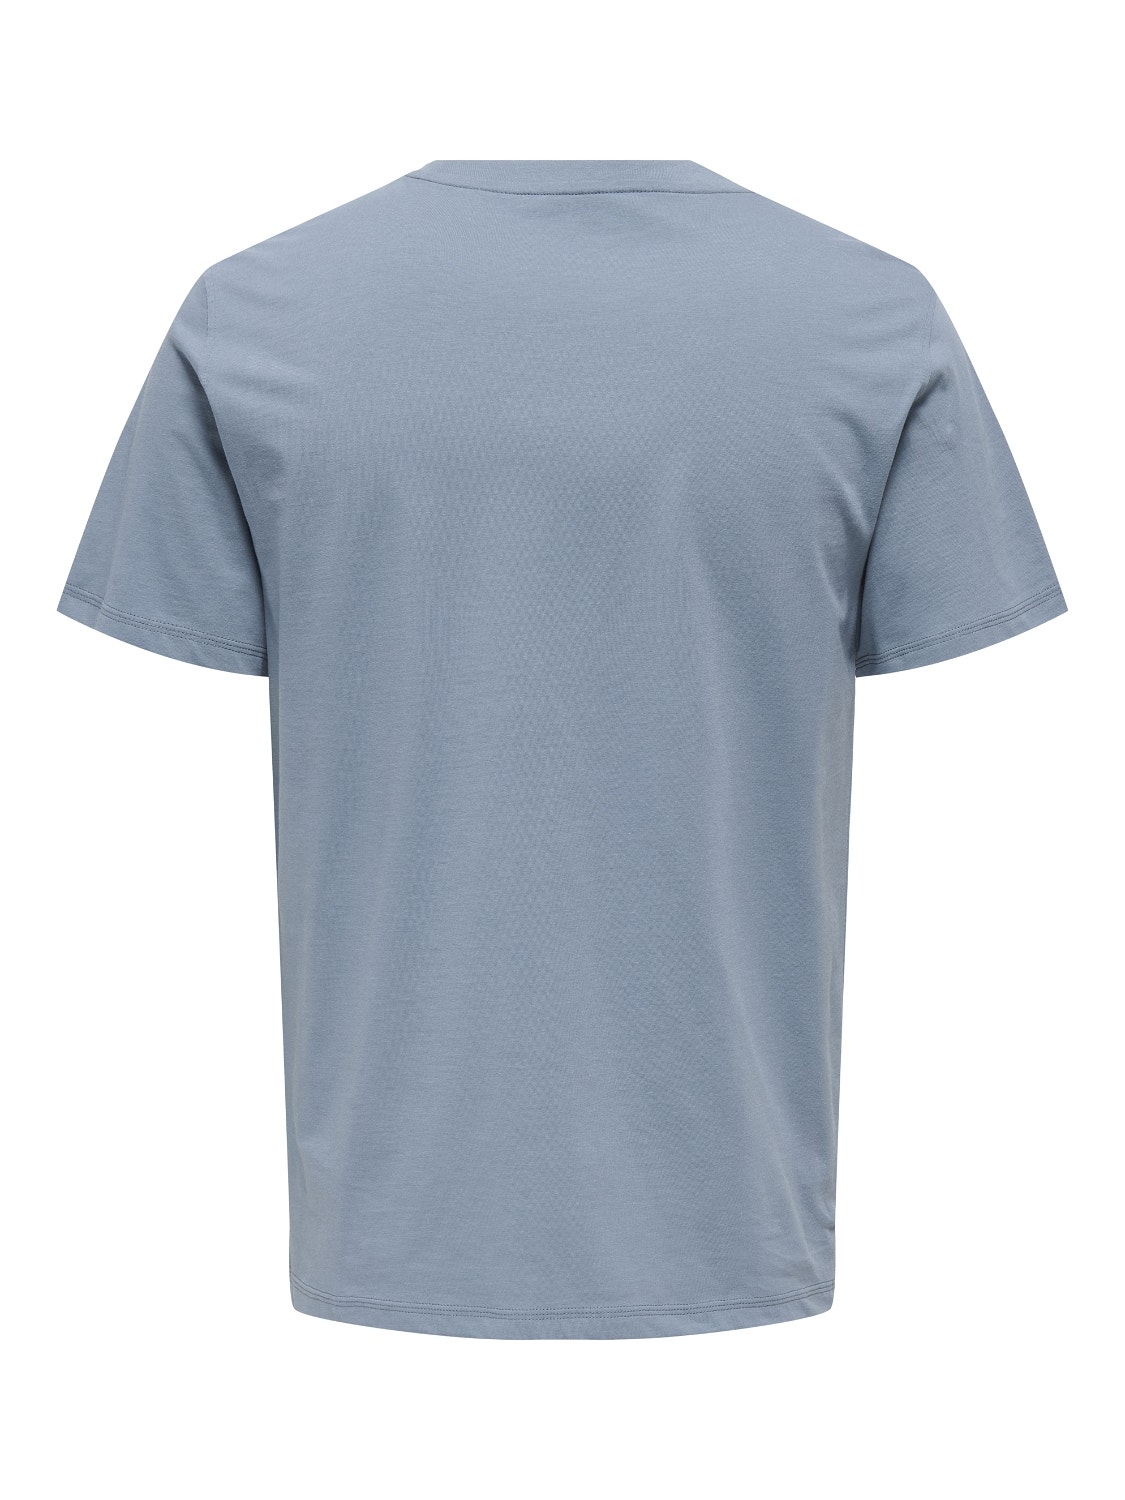 ONLY & SONS Regular Fit Round Neck T-Shirt -Flint Stone - 22025208